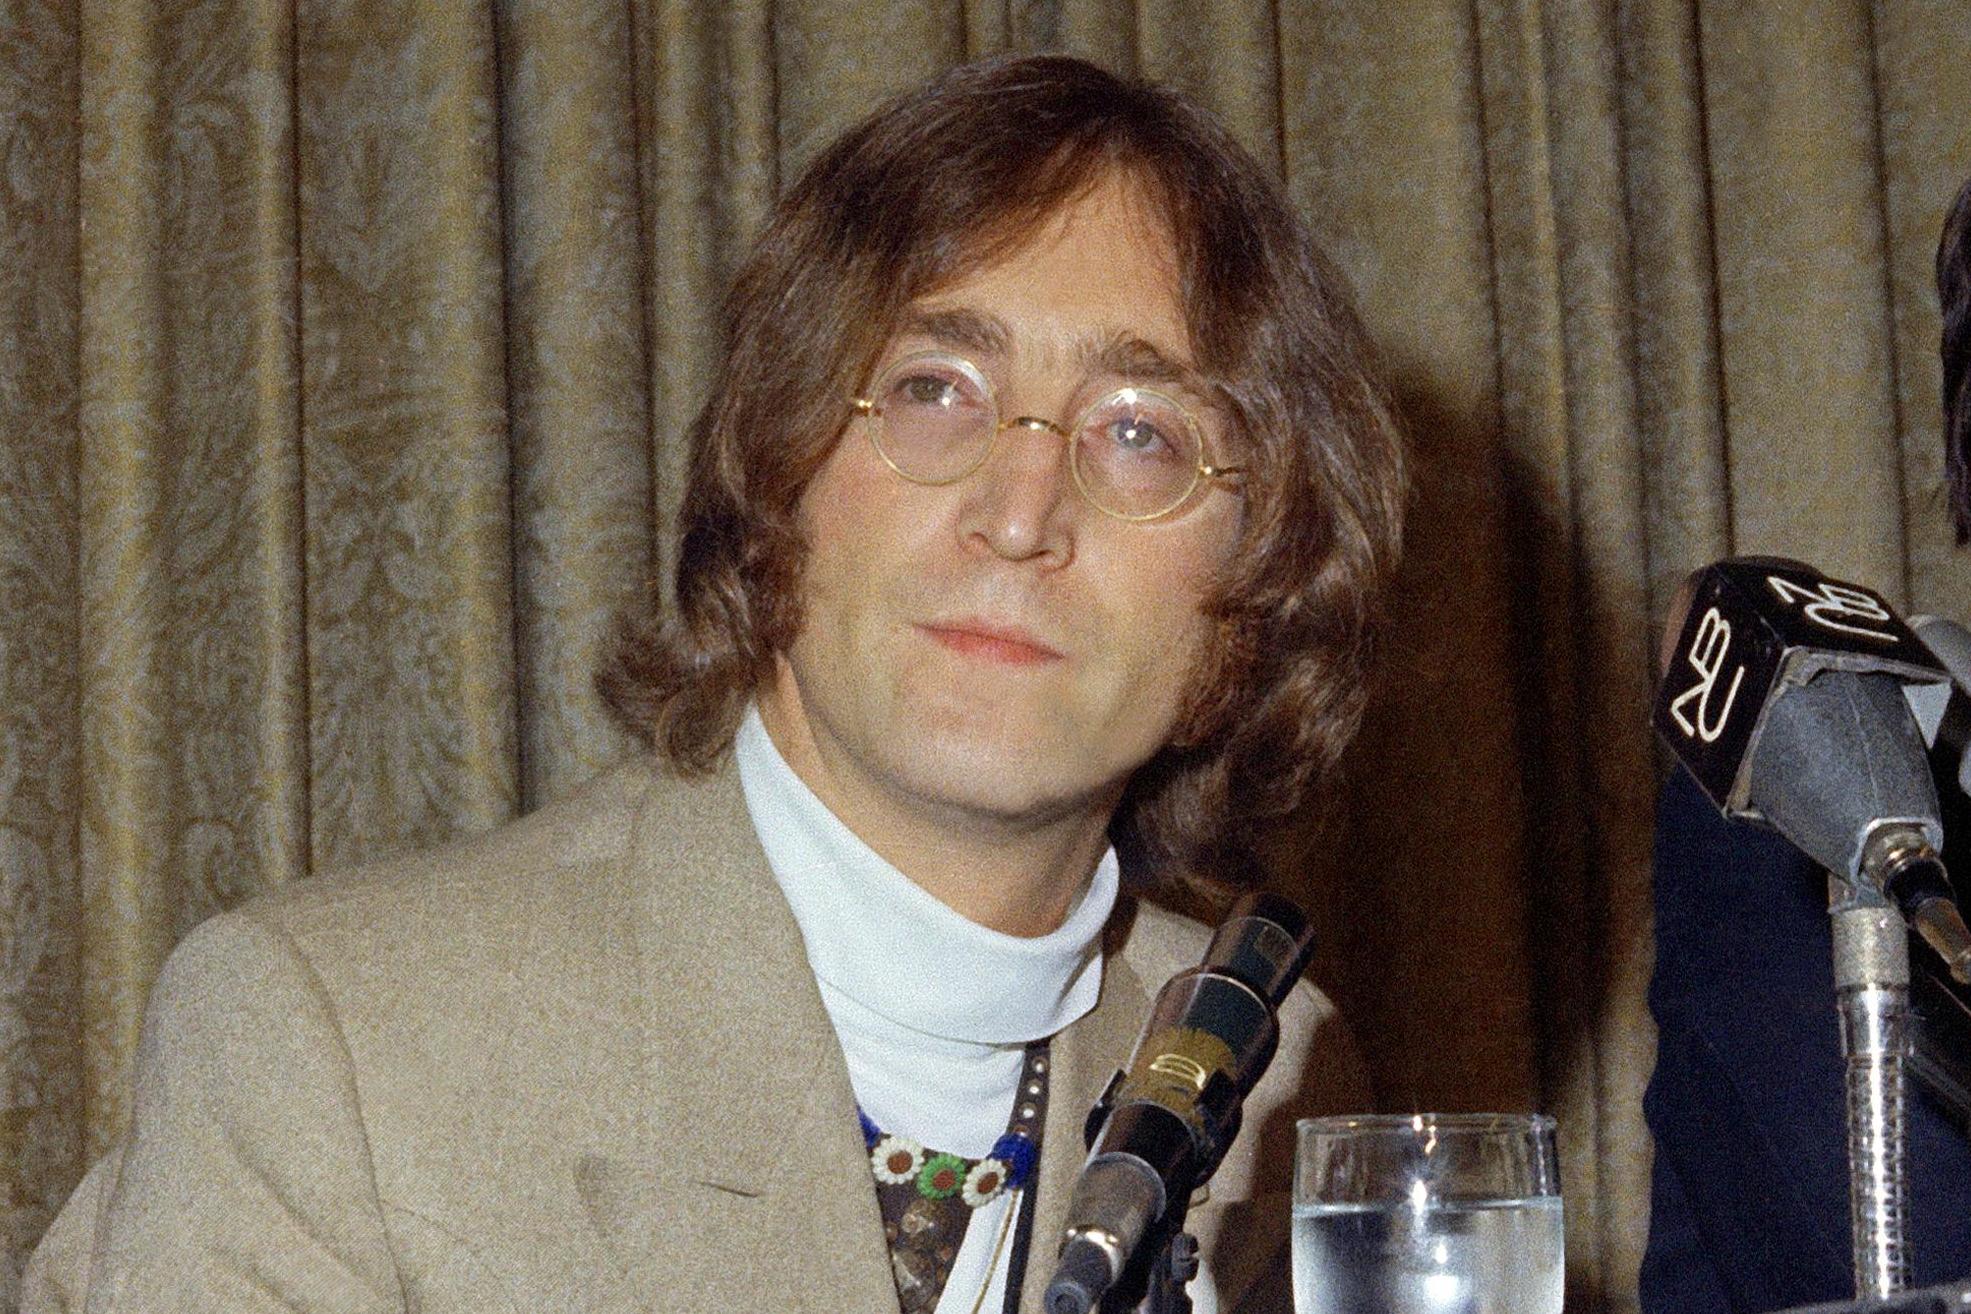 John Lennon appears during a press conference in 1971.